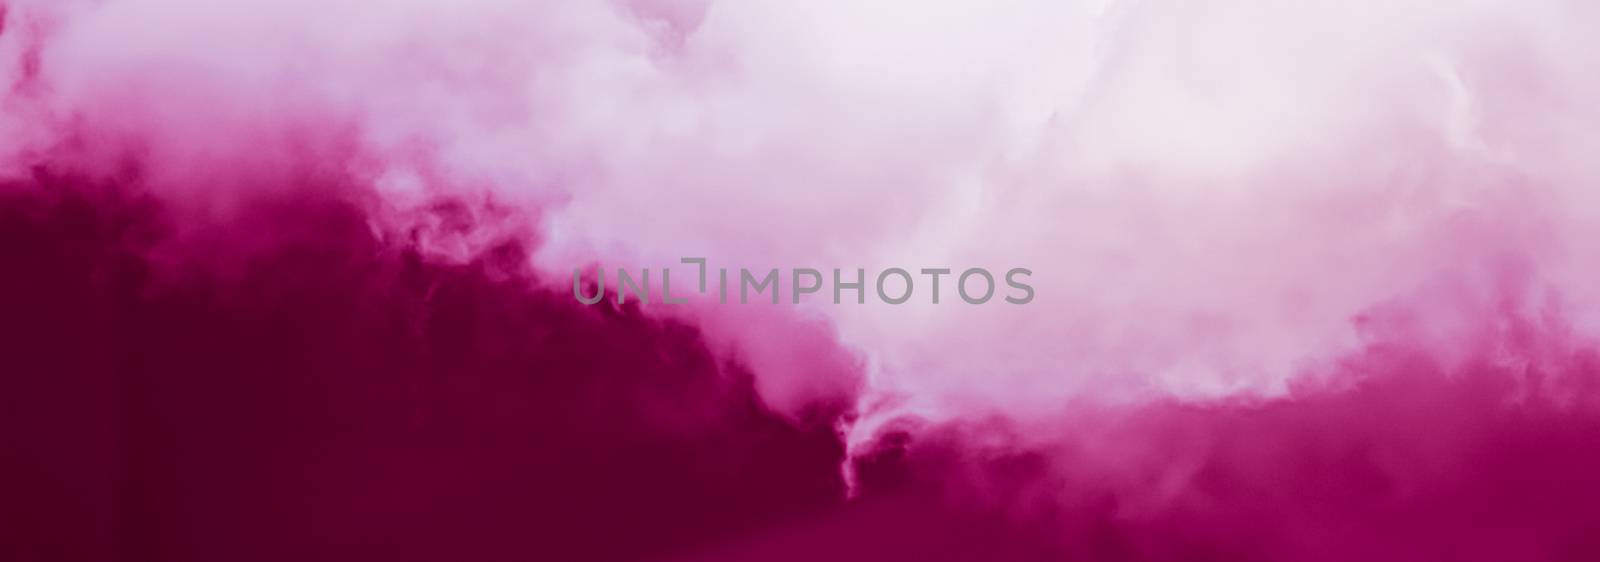 Fantasy and dreamy pink sky, spiritual and nature background by Anneleven